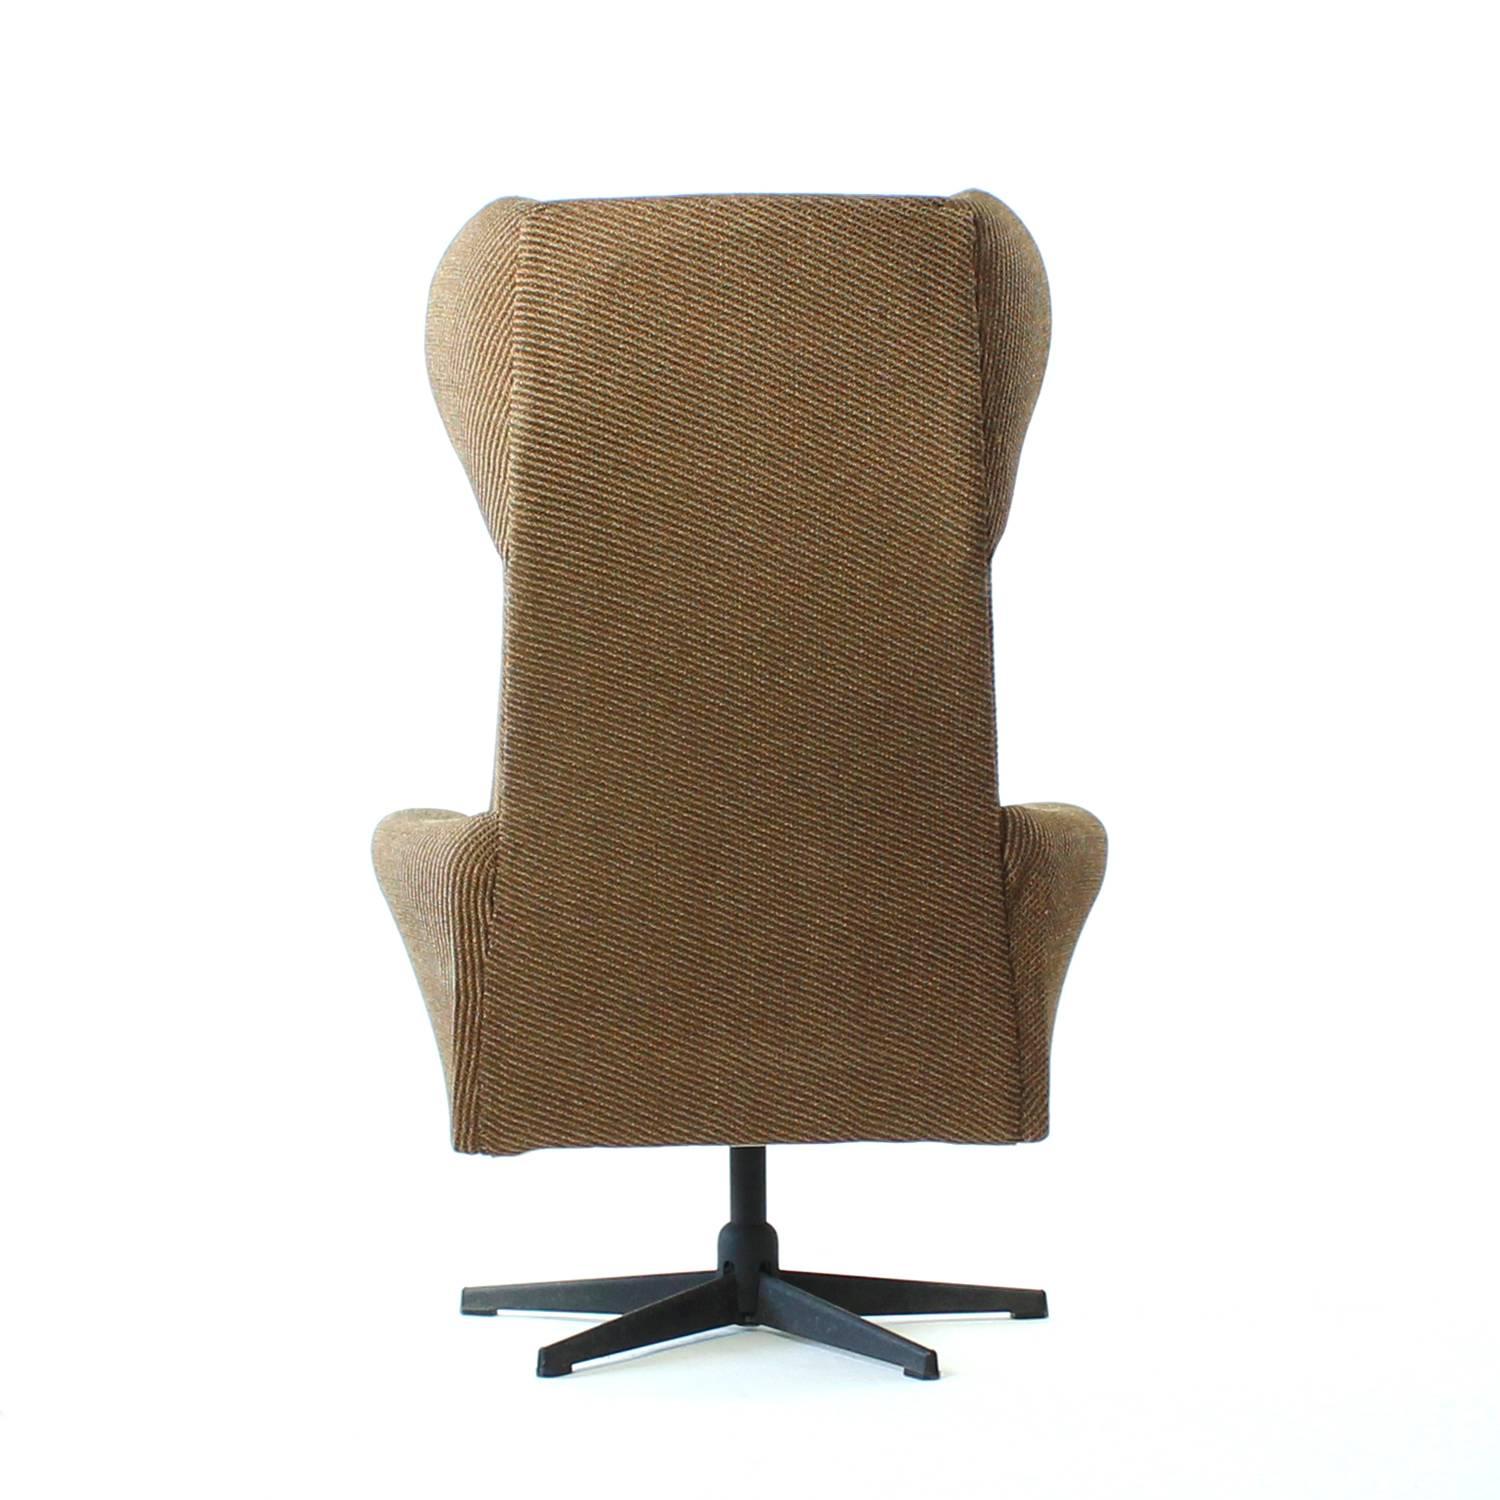 Metal 1970s Swivel Wing Chair in Original Brown Fabric, Czechoslovakia For Sale